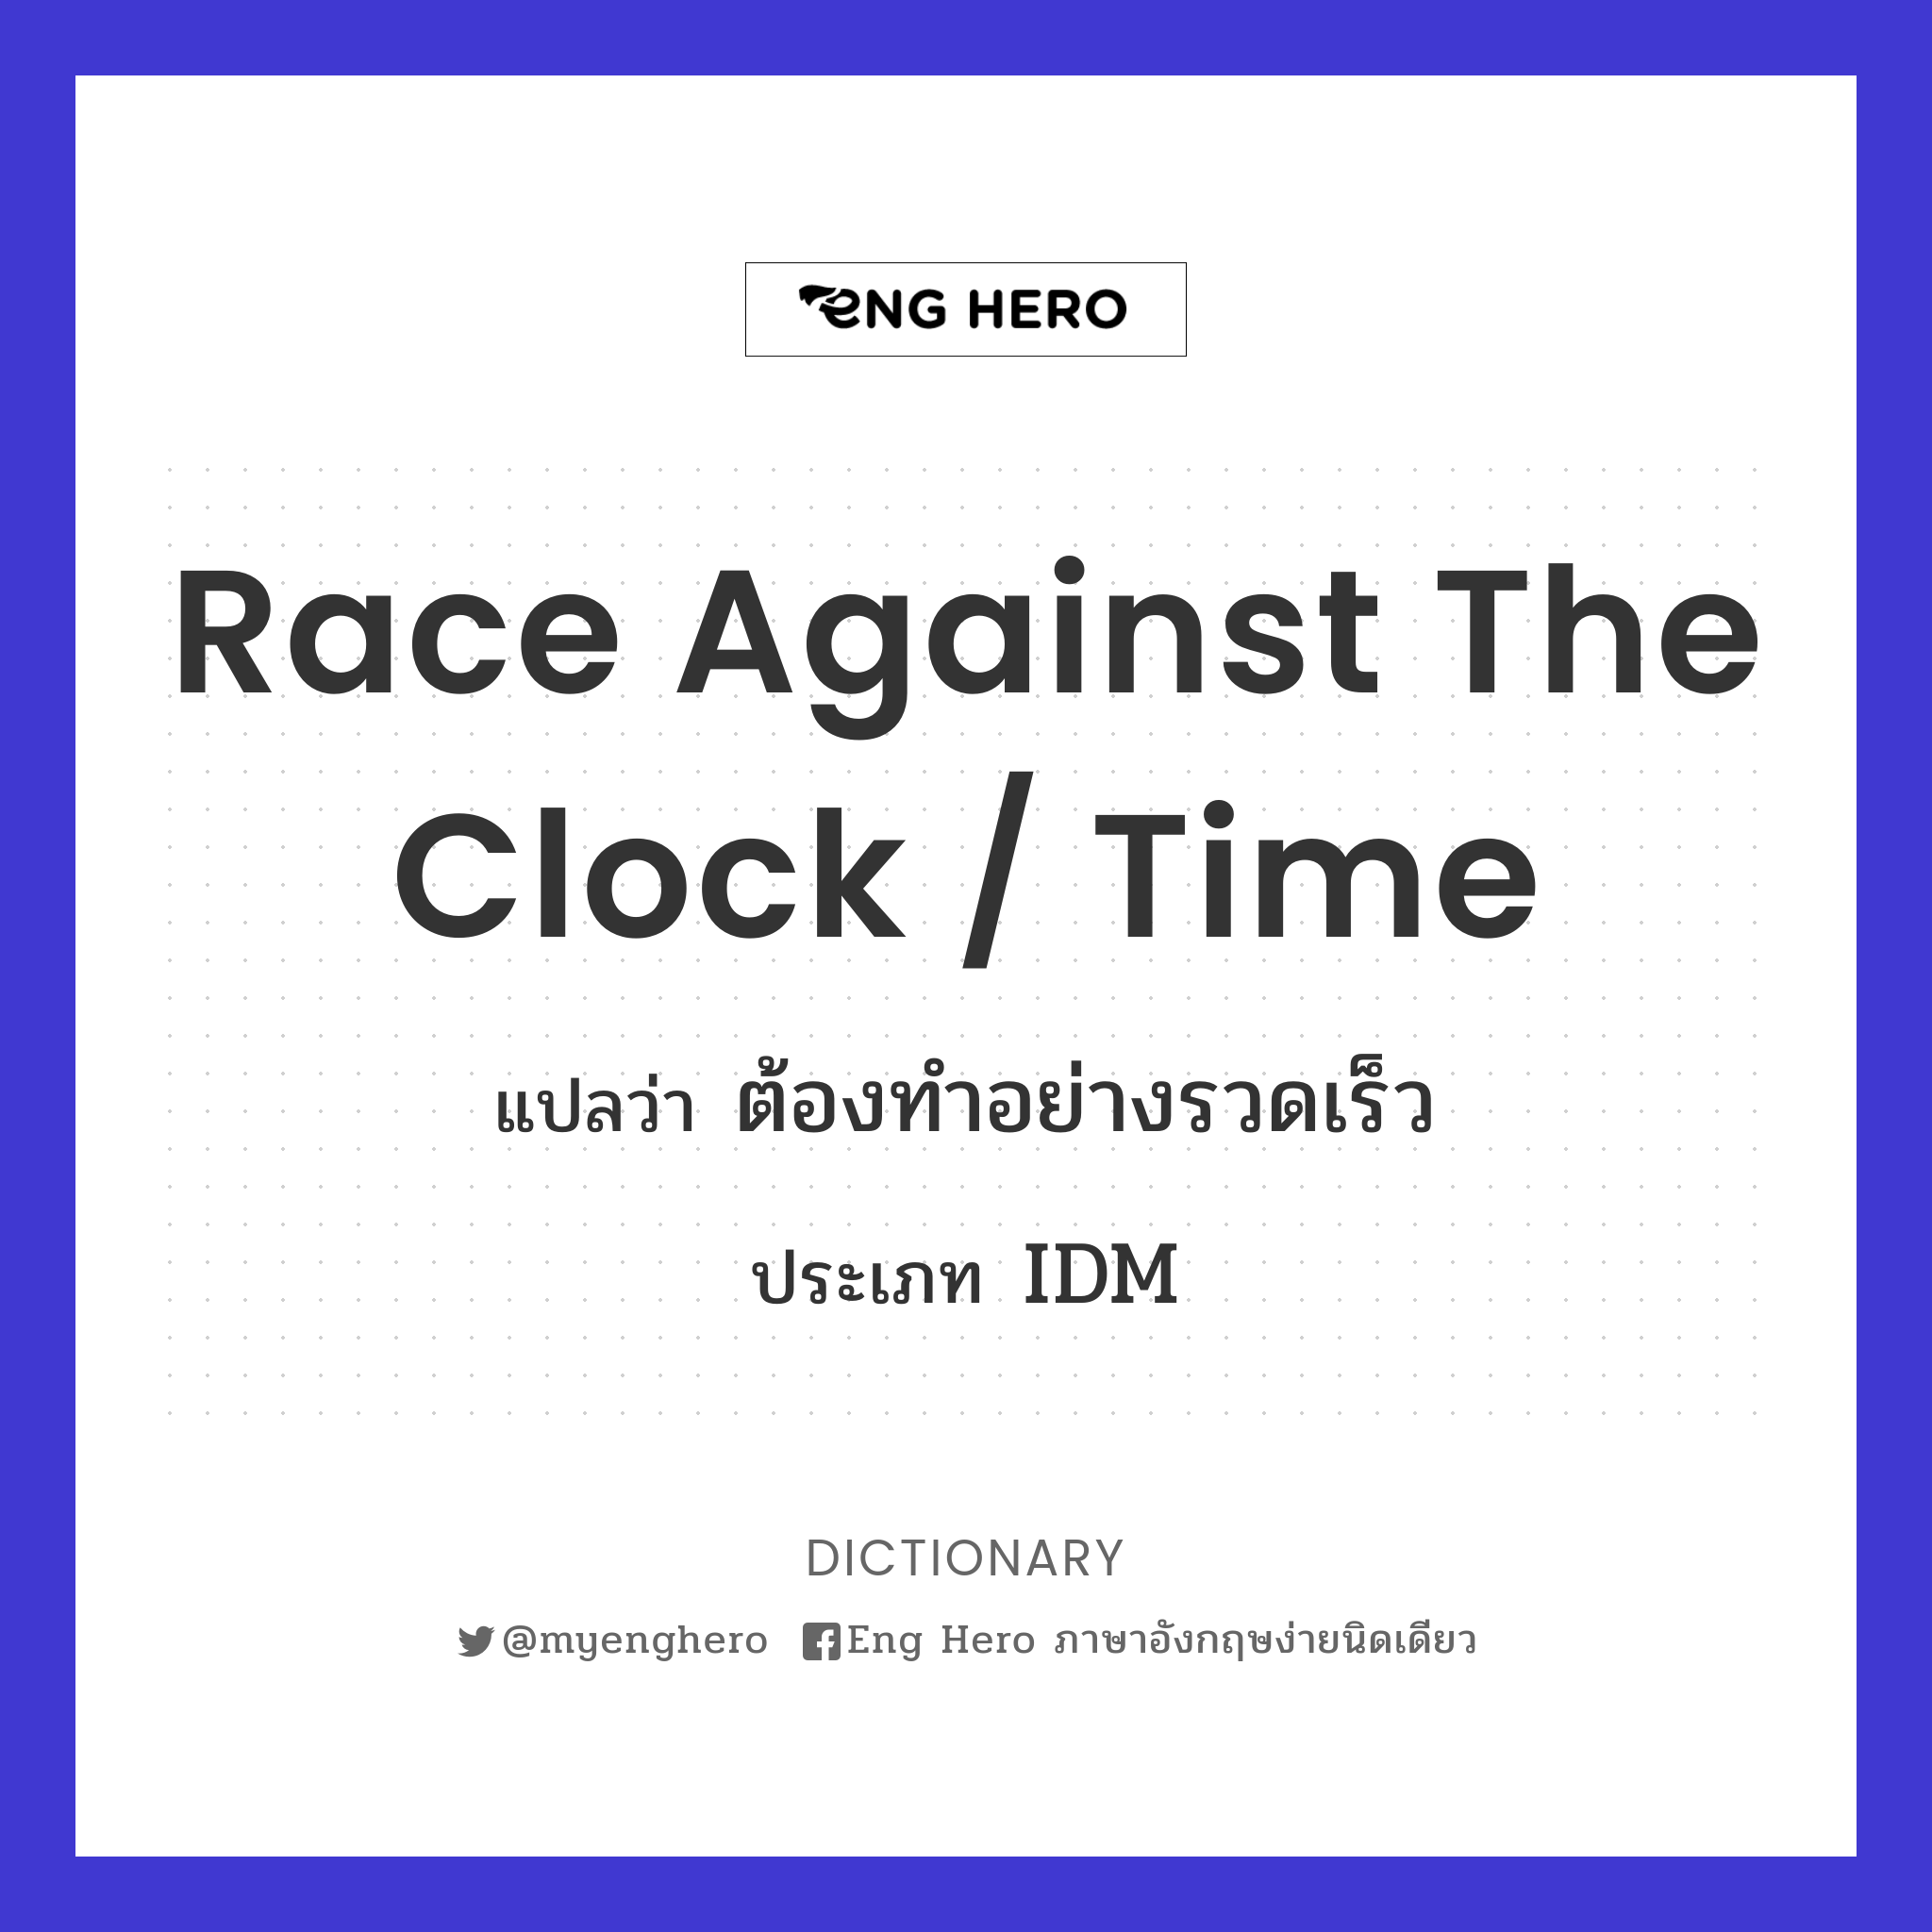 race against the clock / time